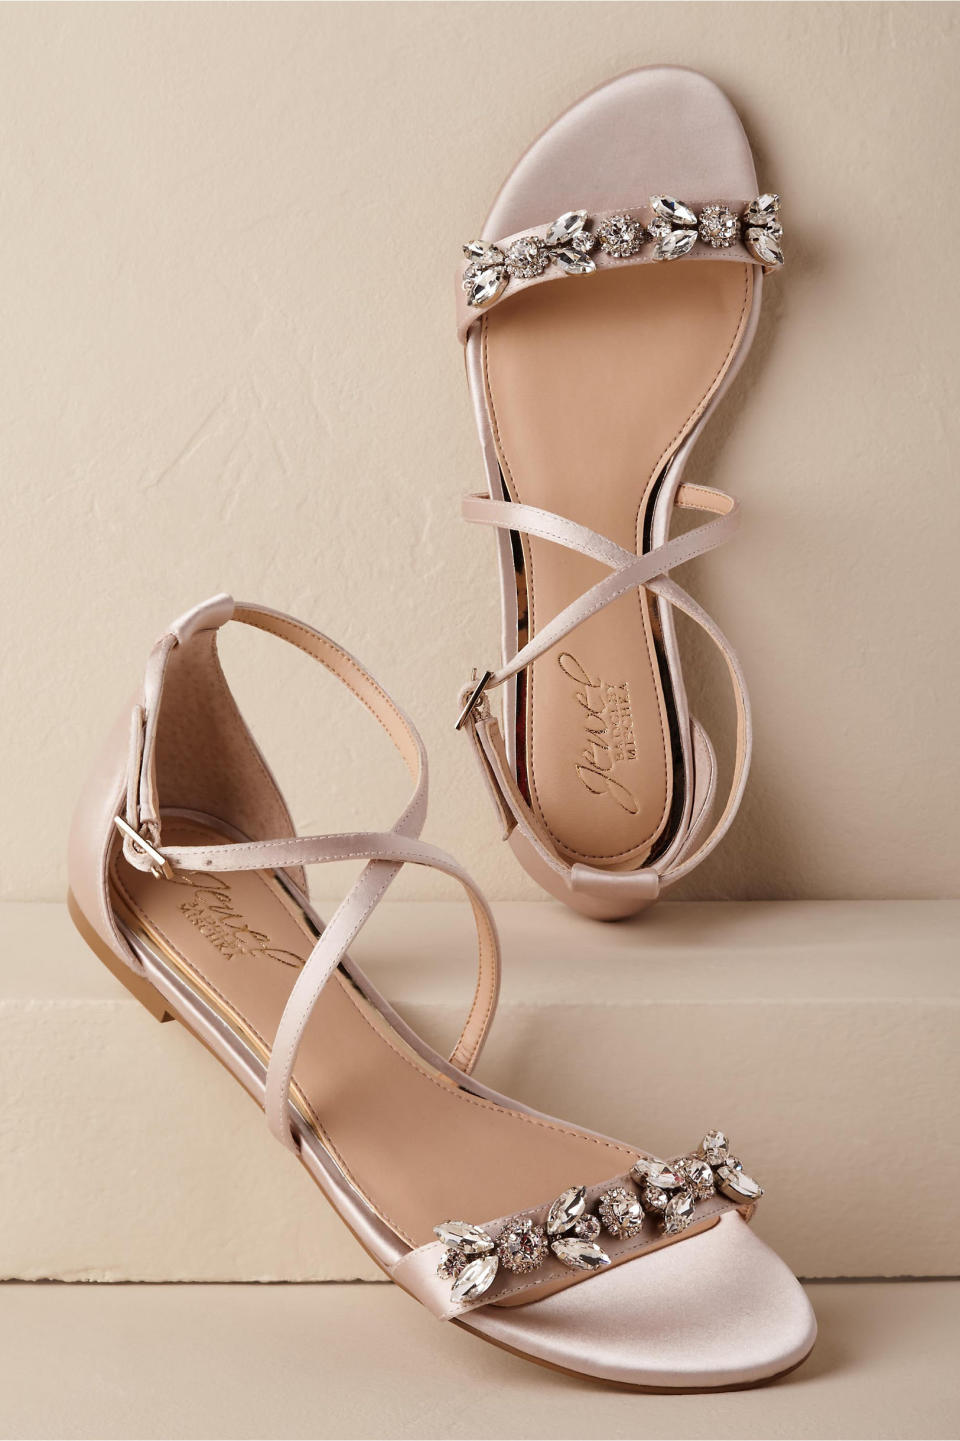 <strong>Sizes</strong>: 6 to 10<br />Get them at <a href="https://www.bhldn.com/shoes-accessories-flats/tessy-sandals/productoptionids/6d19ab0c-a958-40a7-9c18-cc1278ce92d2" target="_blank" rel="noopener noreferrer">BHLDN</a>.&nbsp;